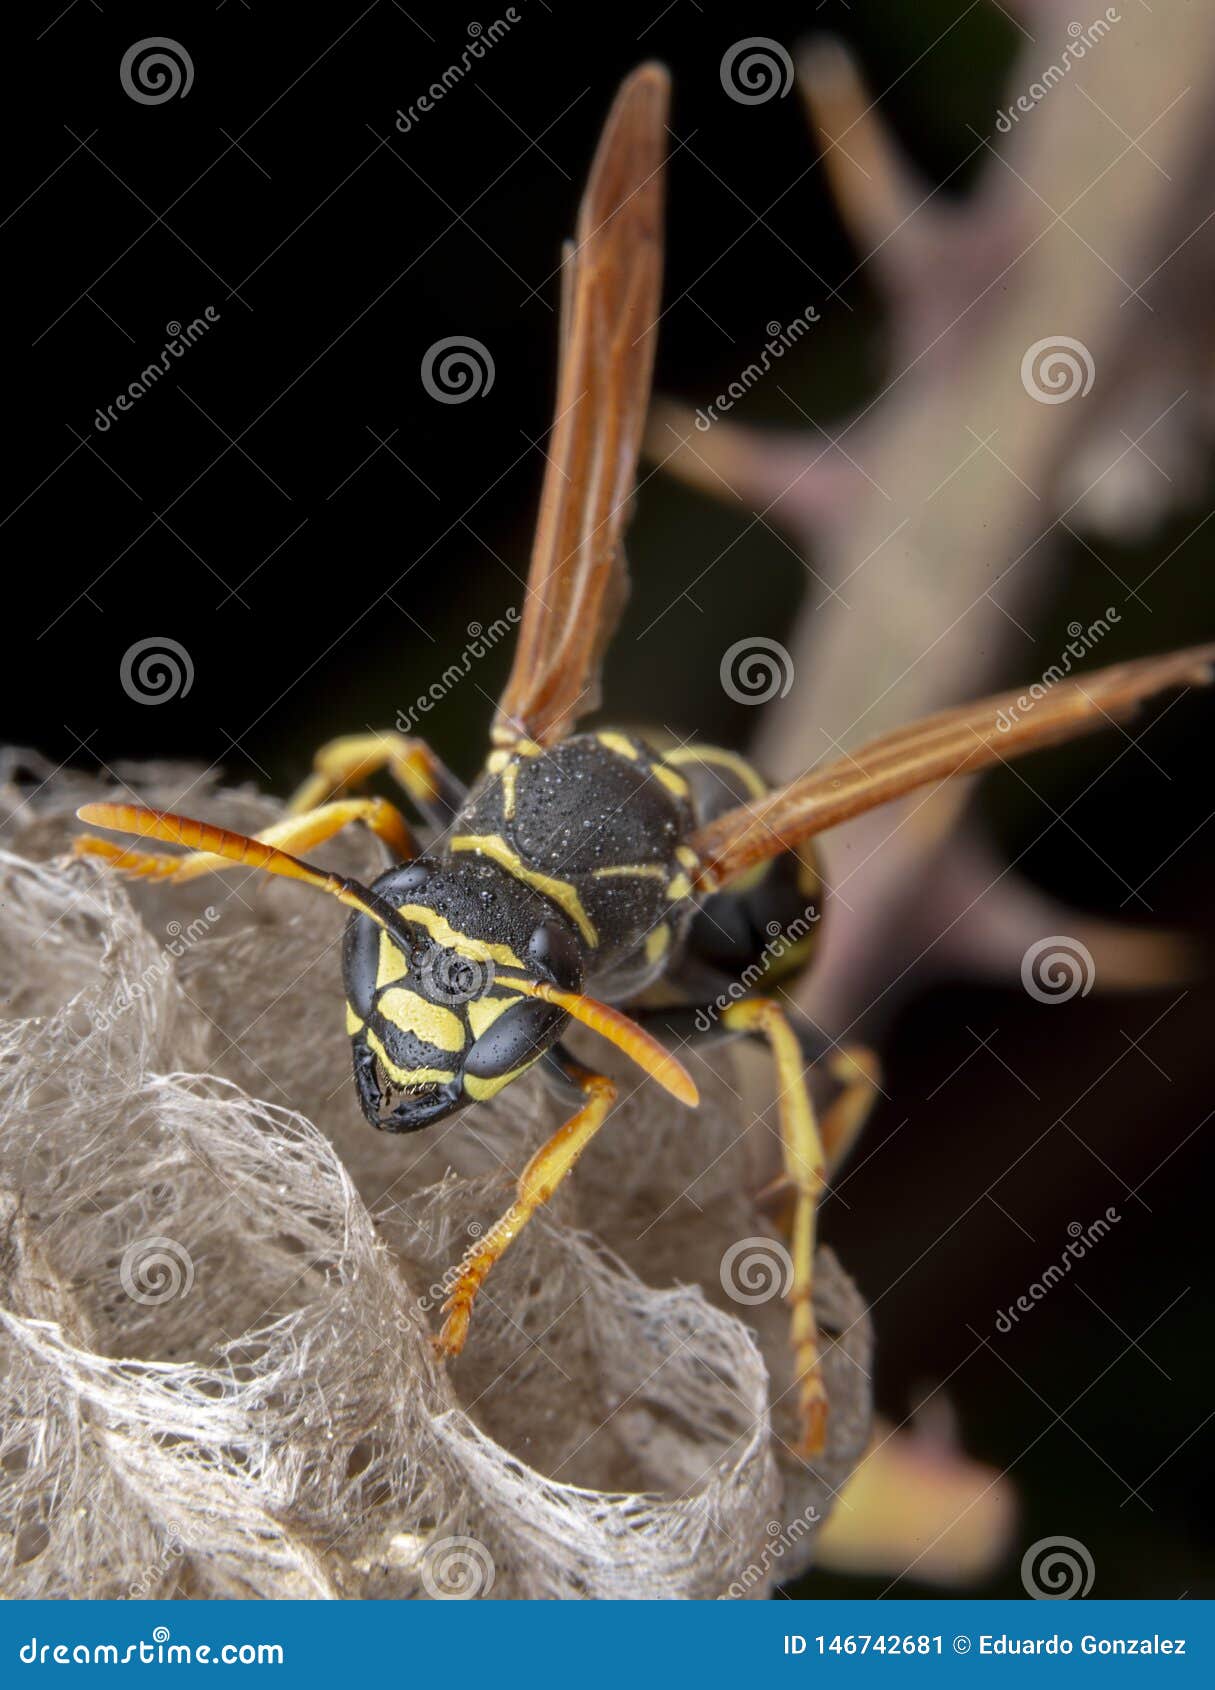 female wiorker polistes nympha wasp protecting his nest